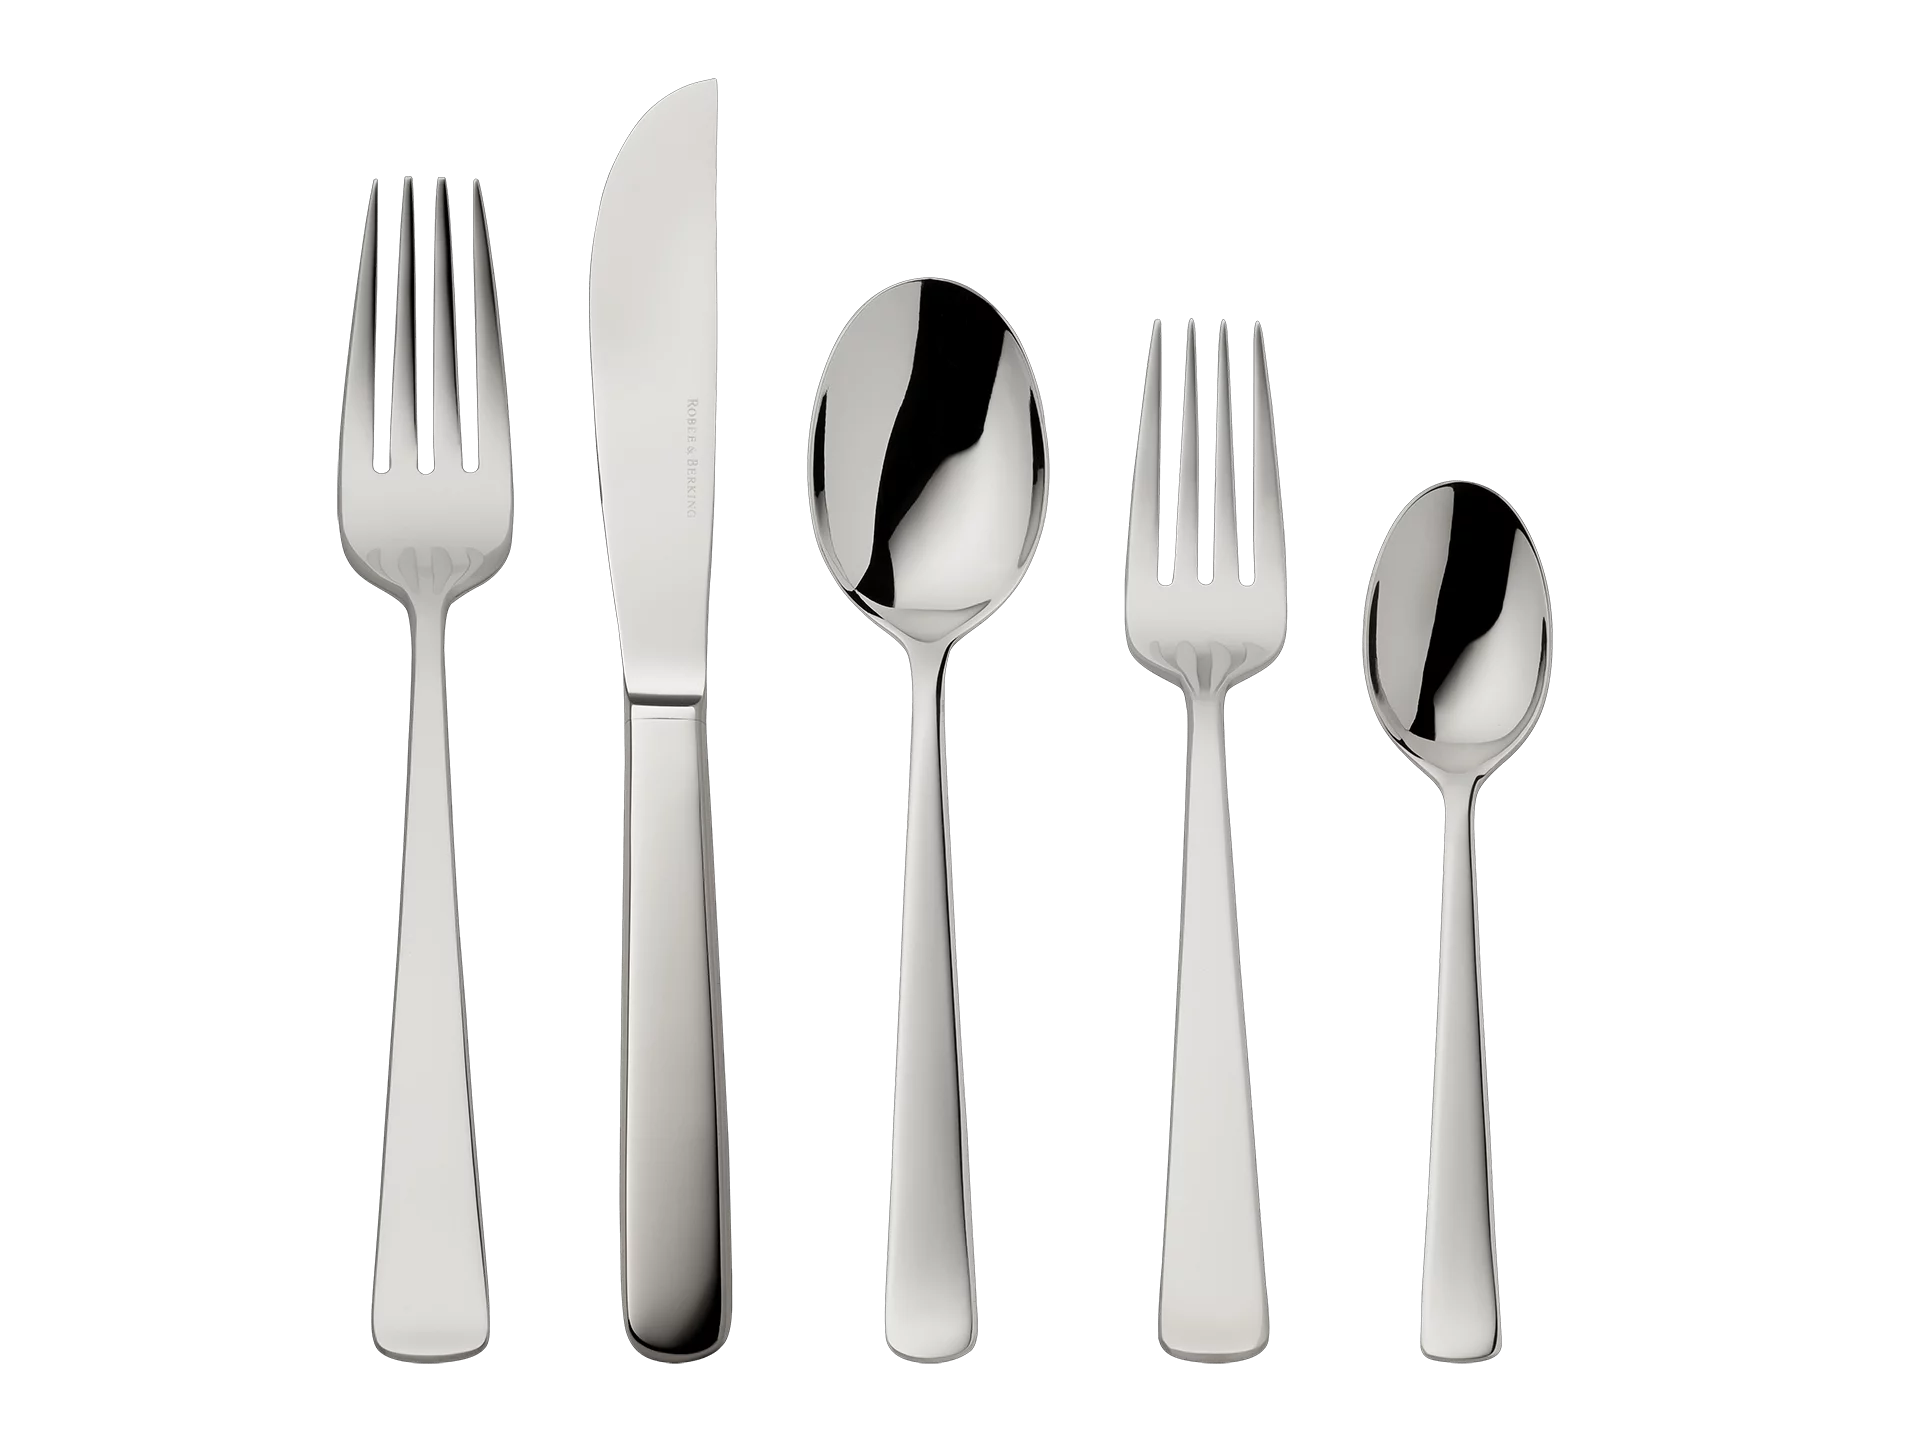 Atlantic Brillant 5-piece place setting (18/8 stainless steel)